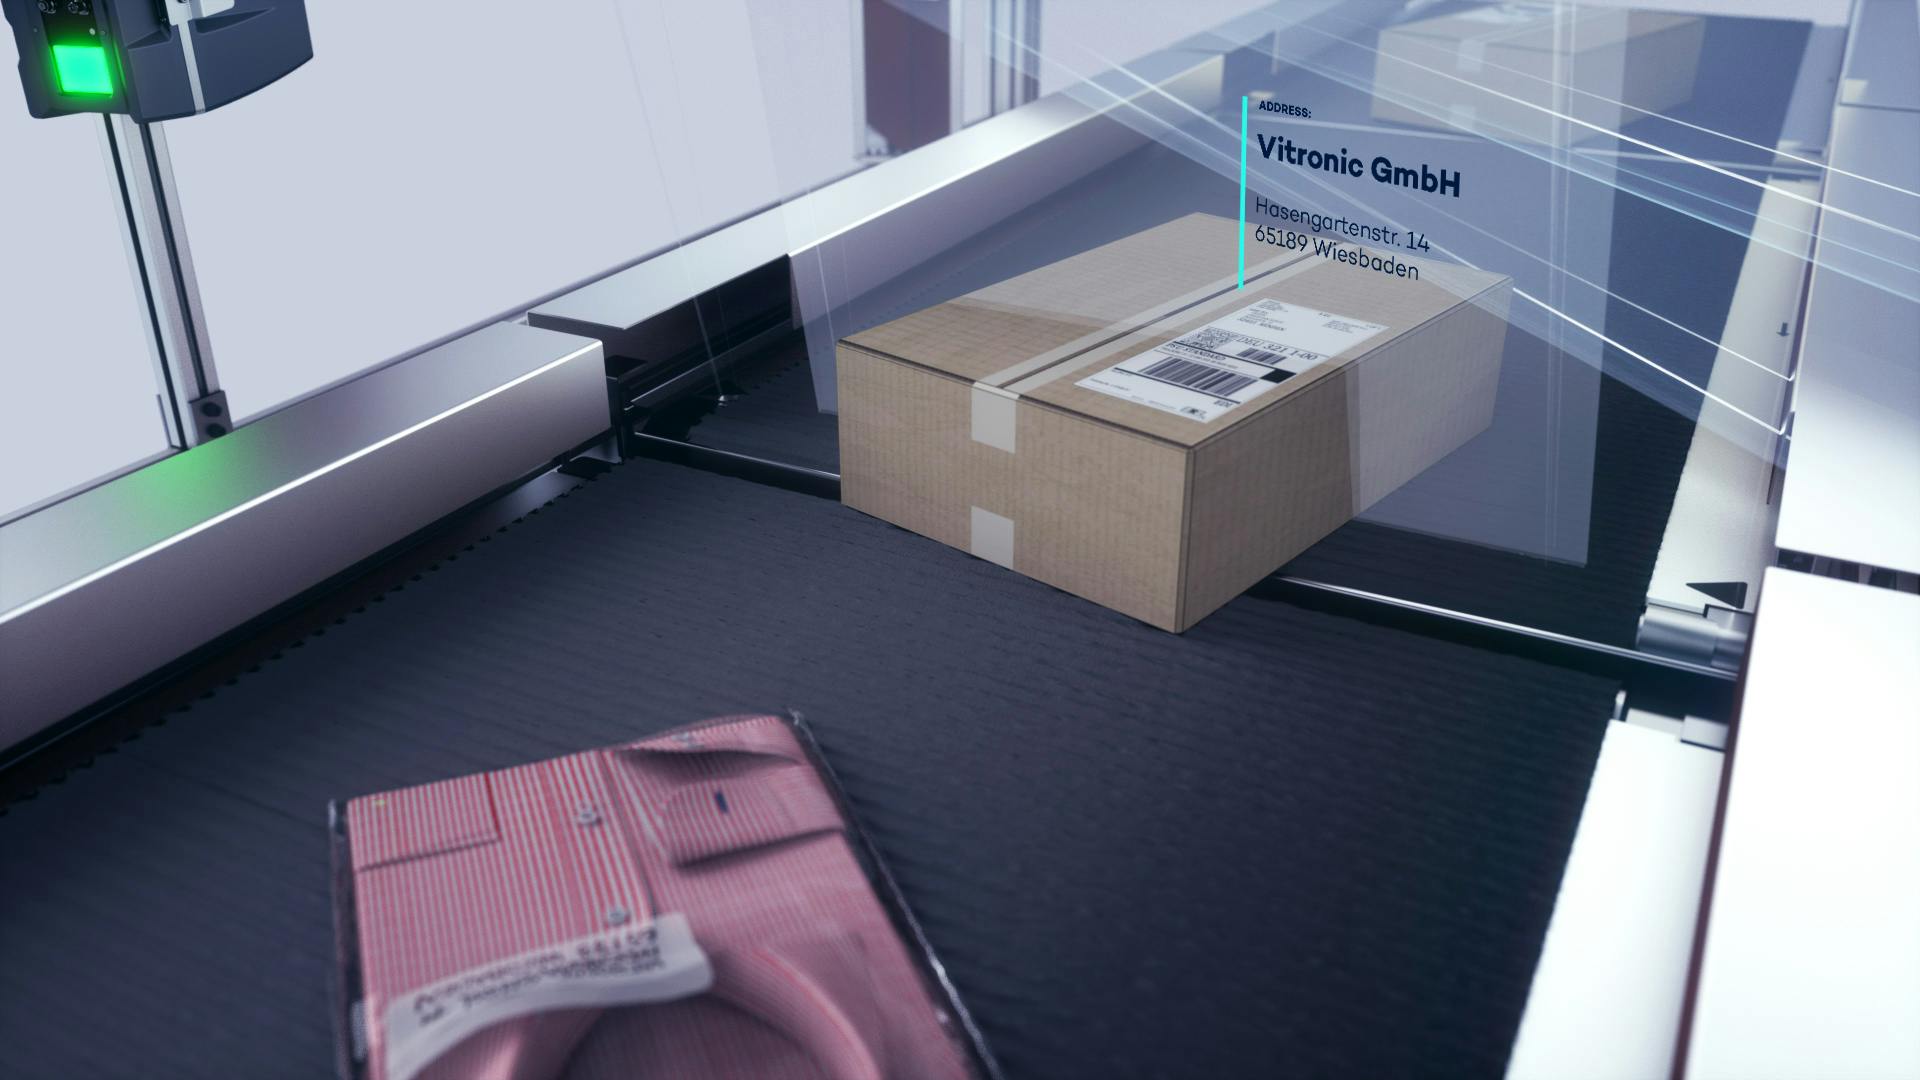 Goods on the conveyor belt: returns labels are quickly read out during returns registration.